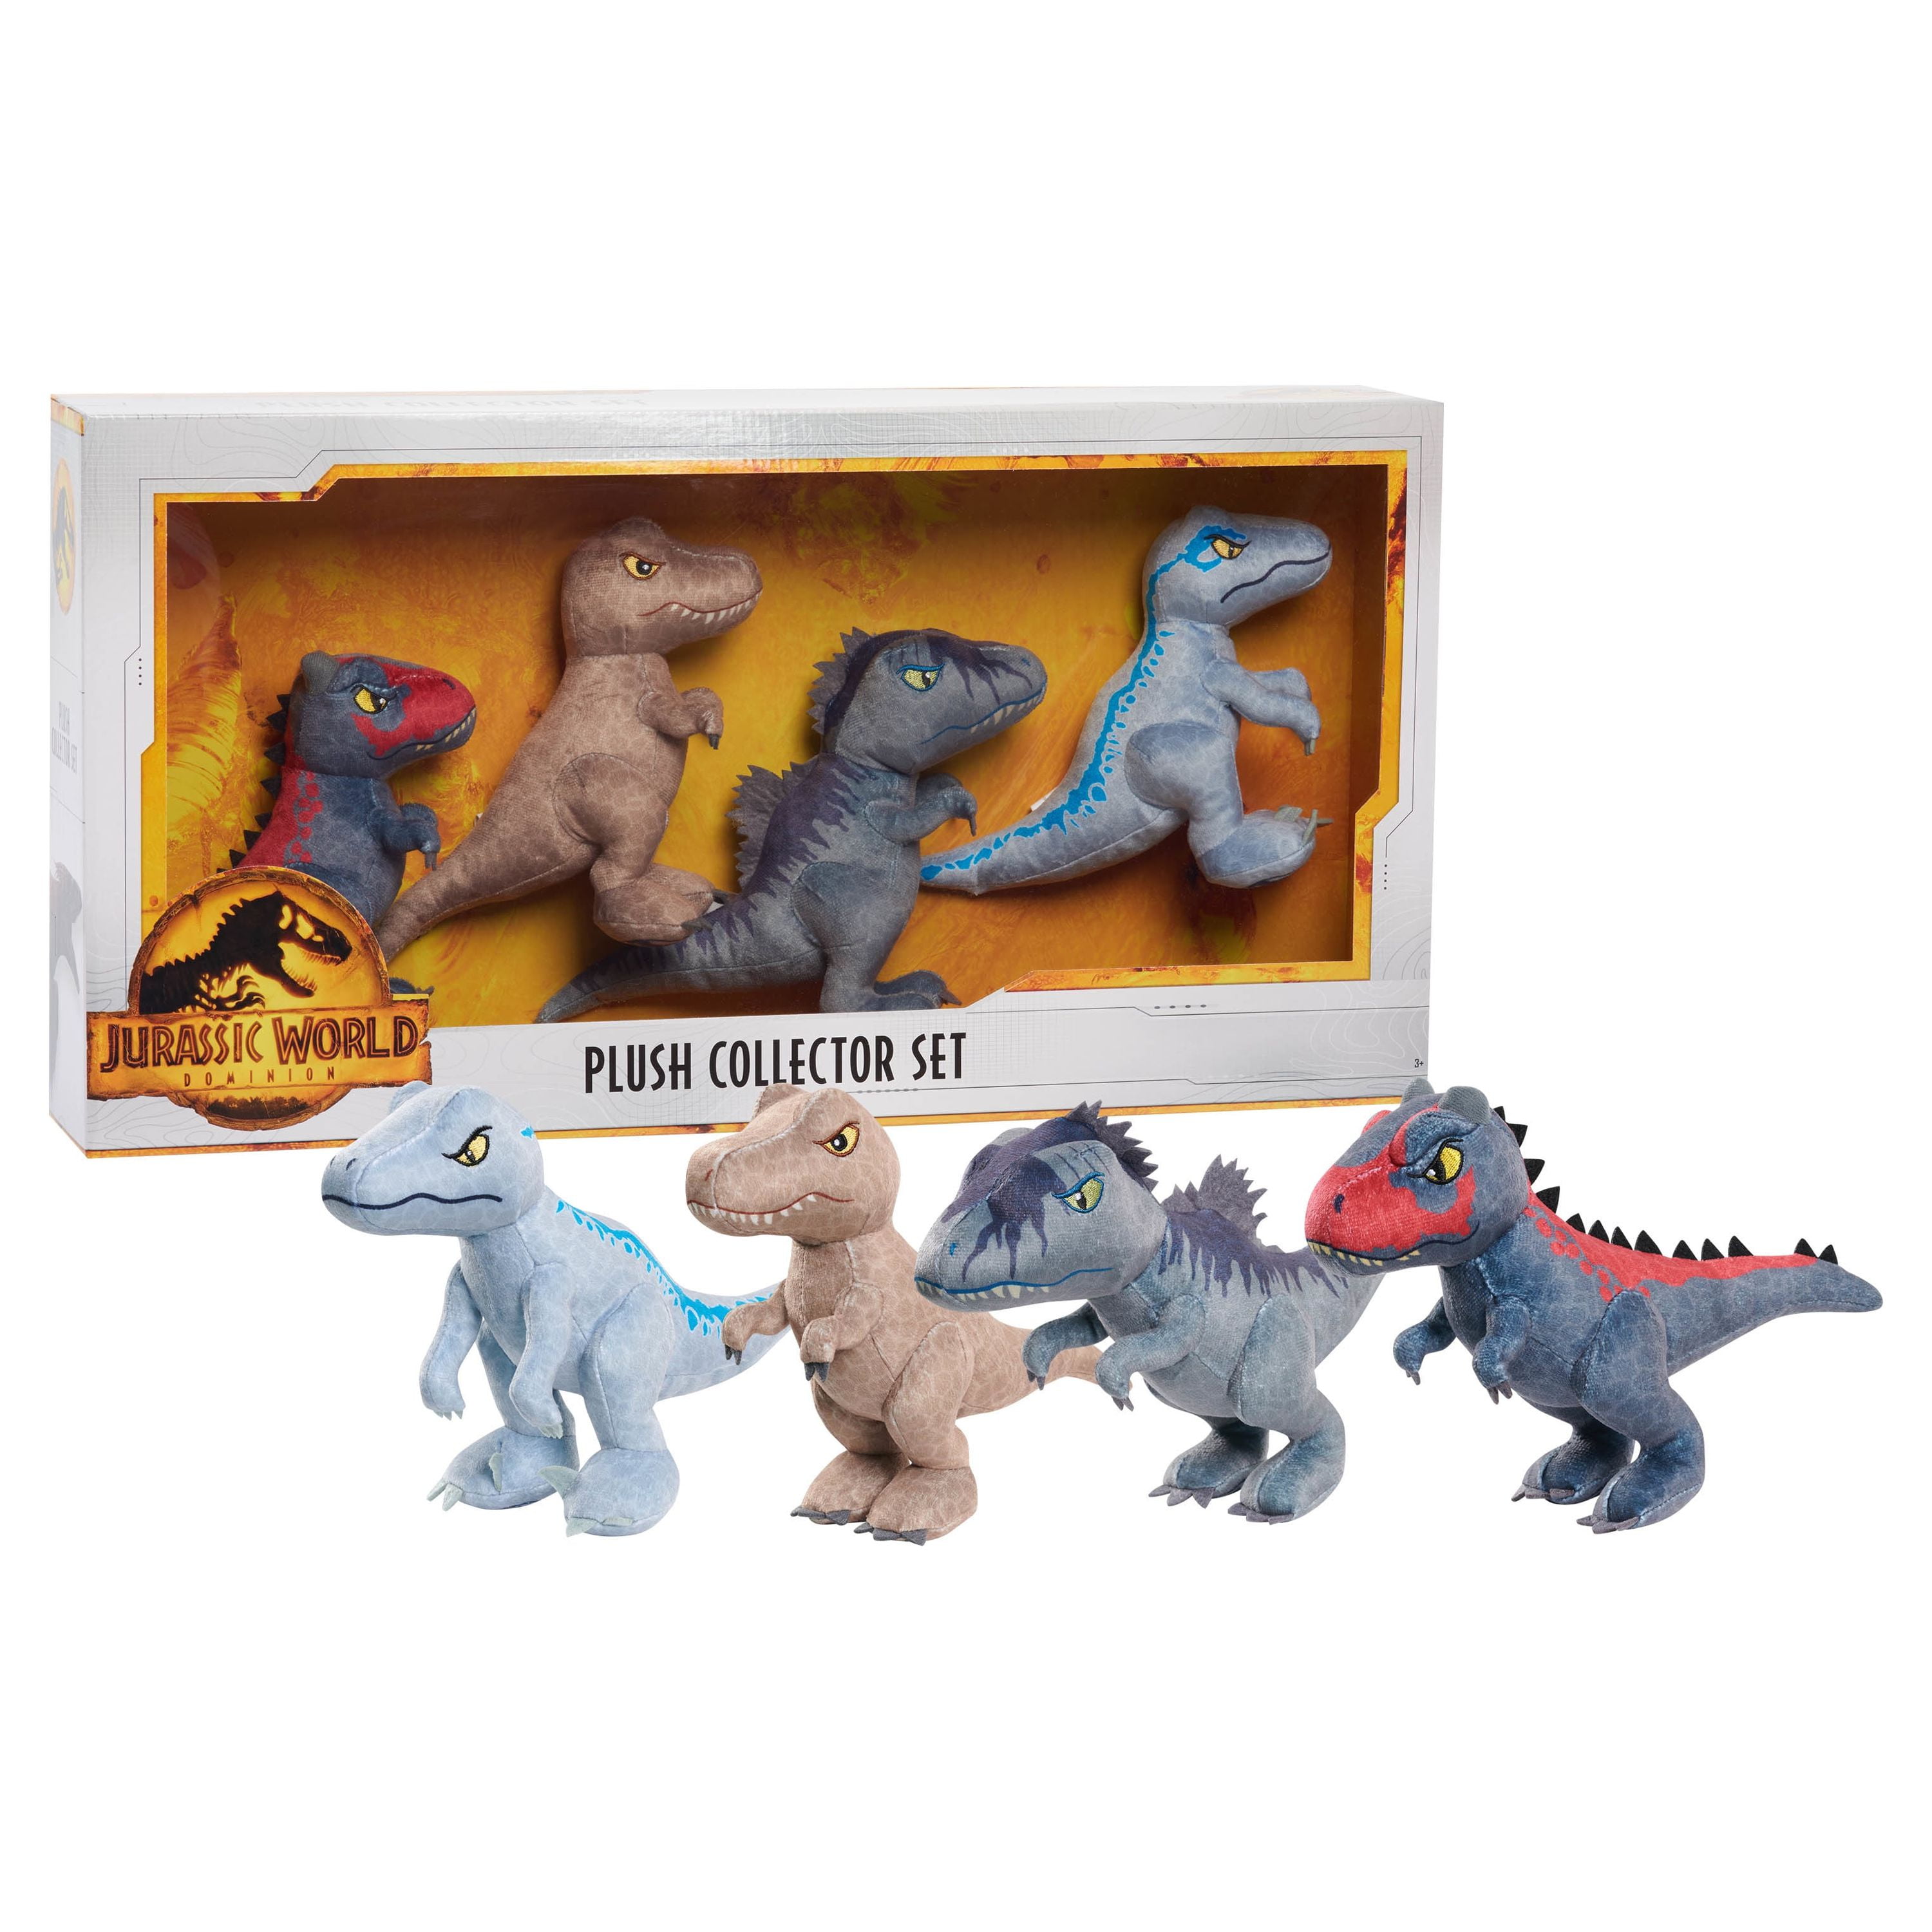 Jurassic World Plush Stuffed Animals Dinosaur Collector Set, Walmart  Exclusive, Kids Toys for Ages 3 Up, Gifts and Presents, Walmart Exclusive